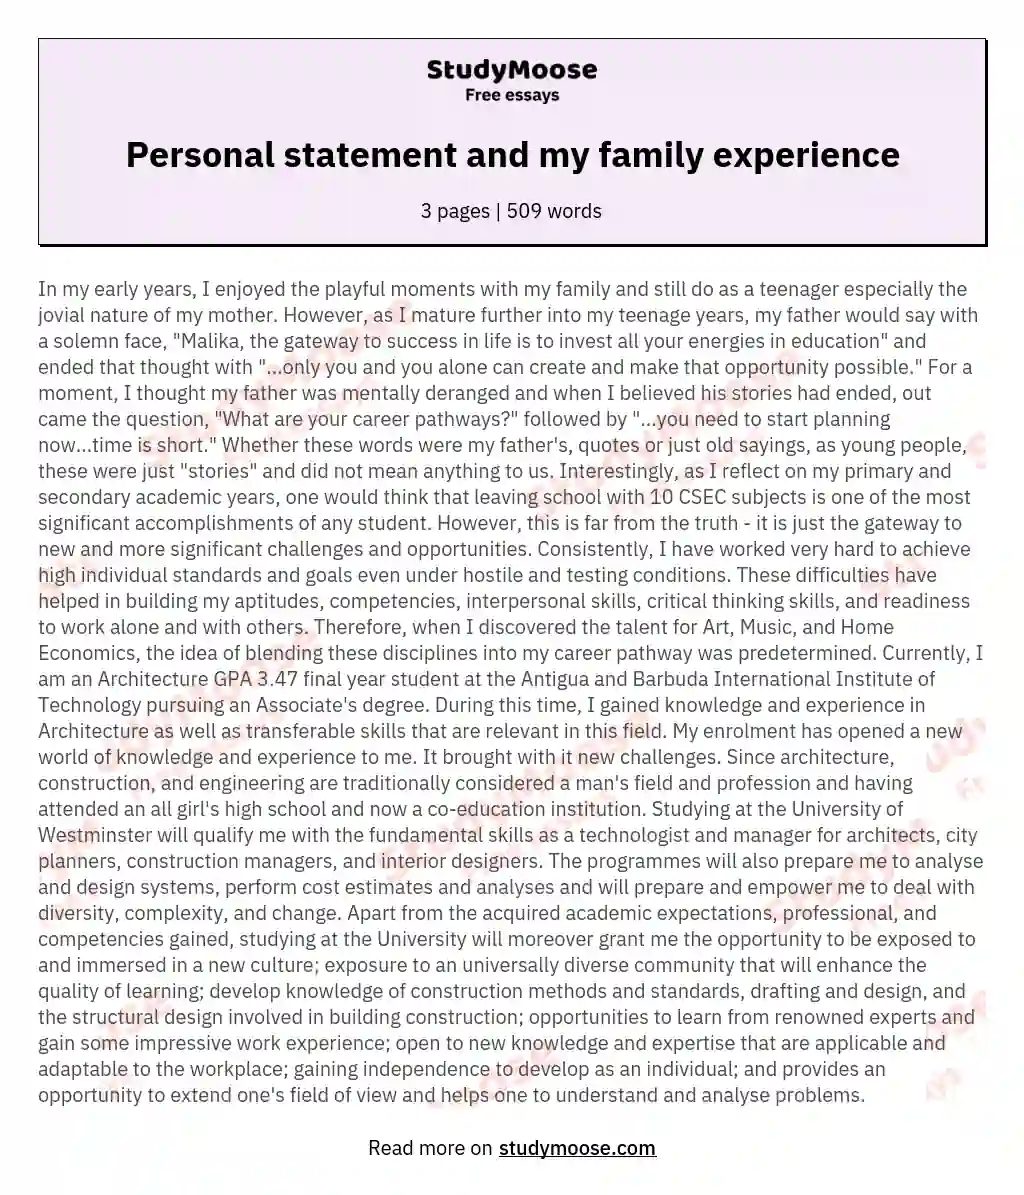 queen's personal statement of experience